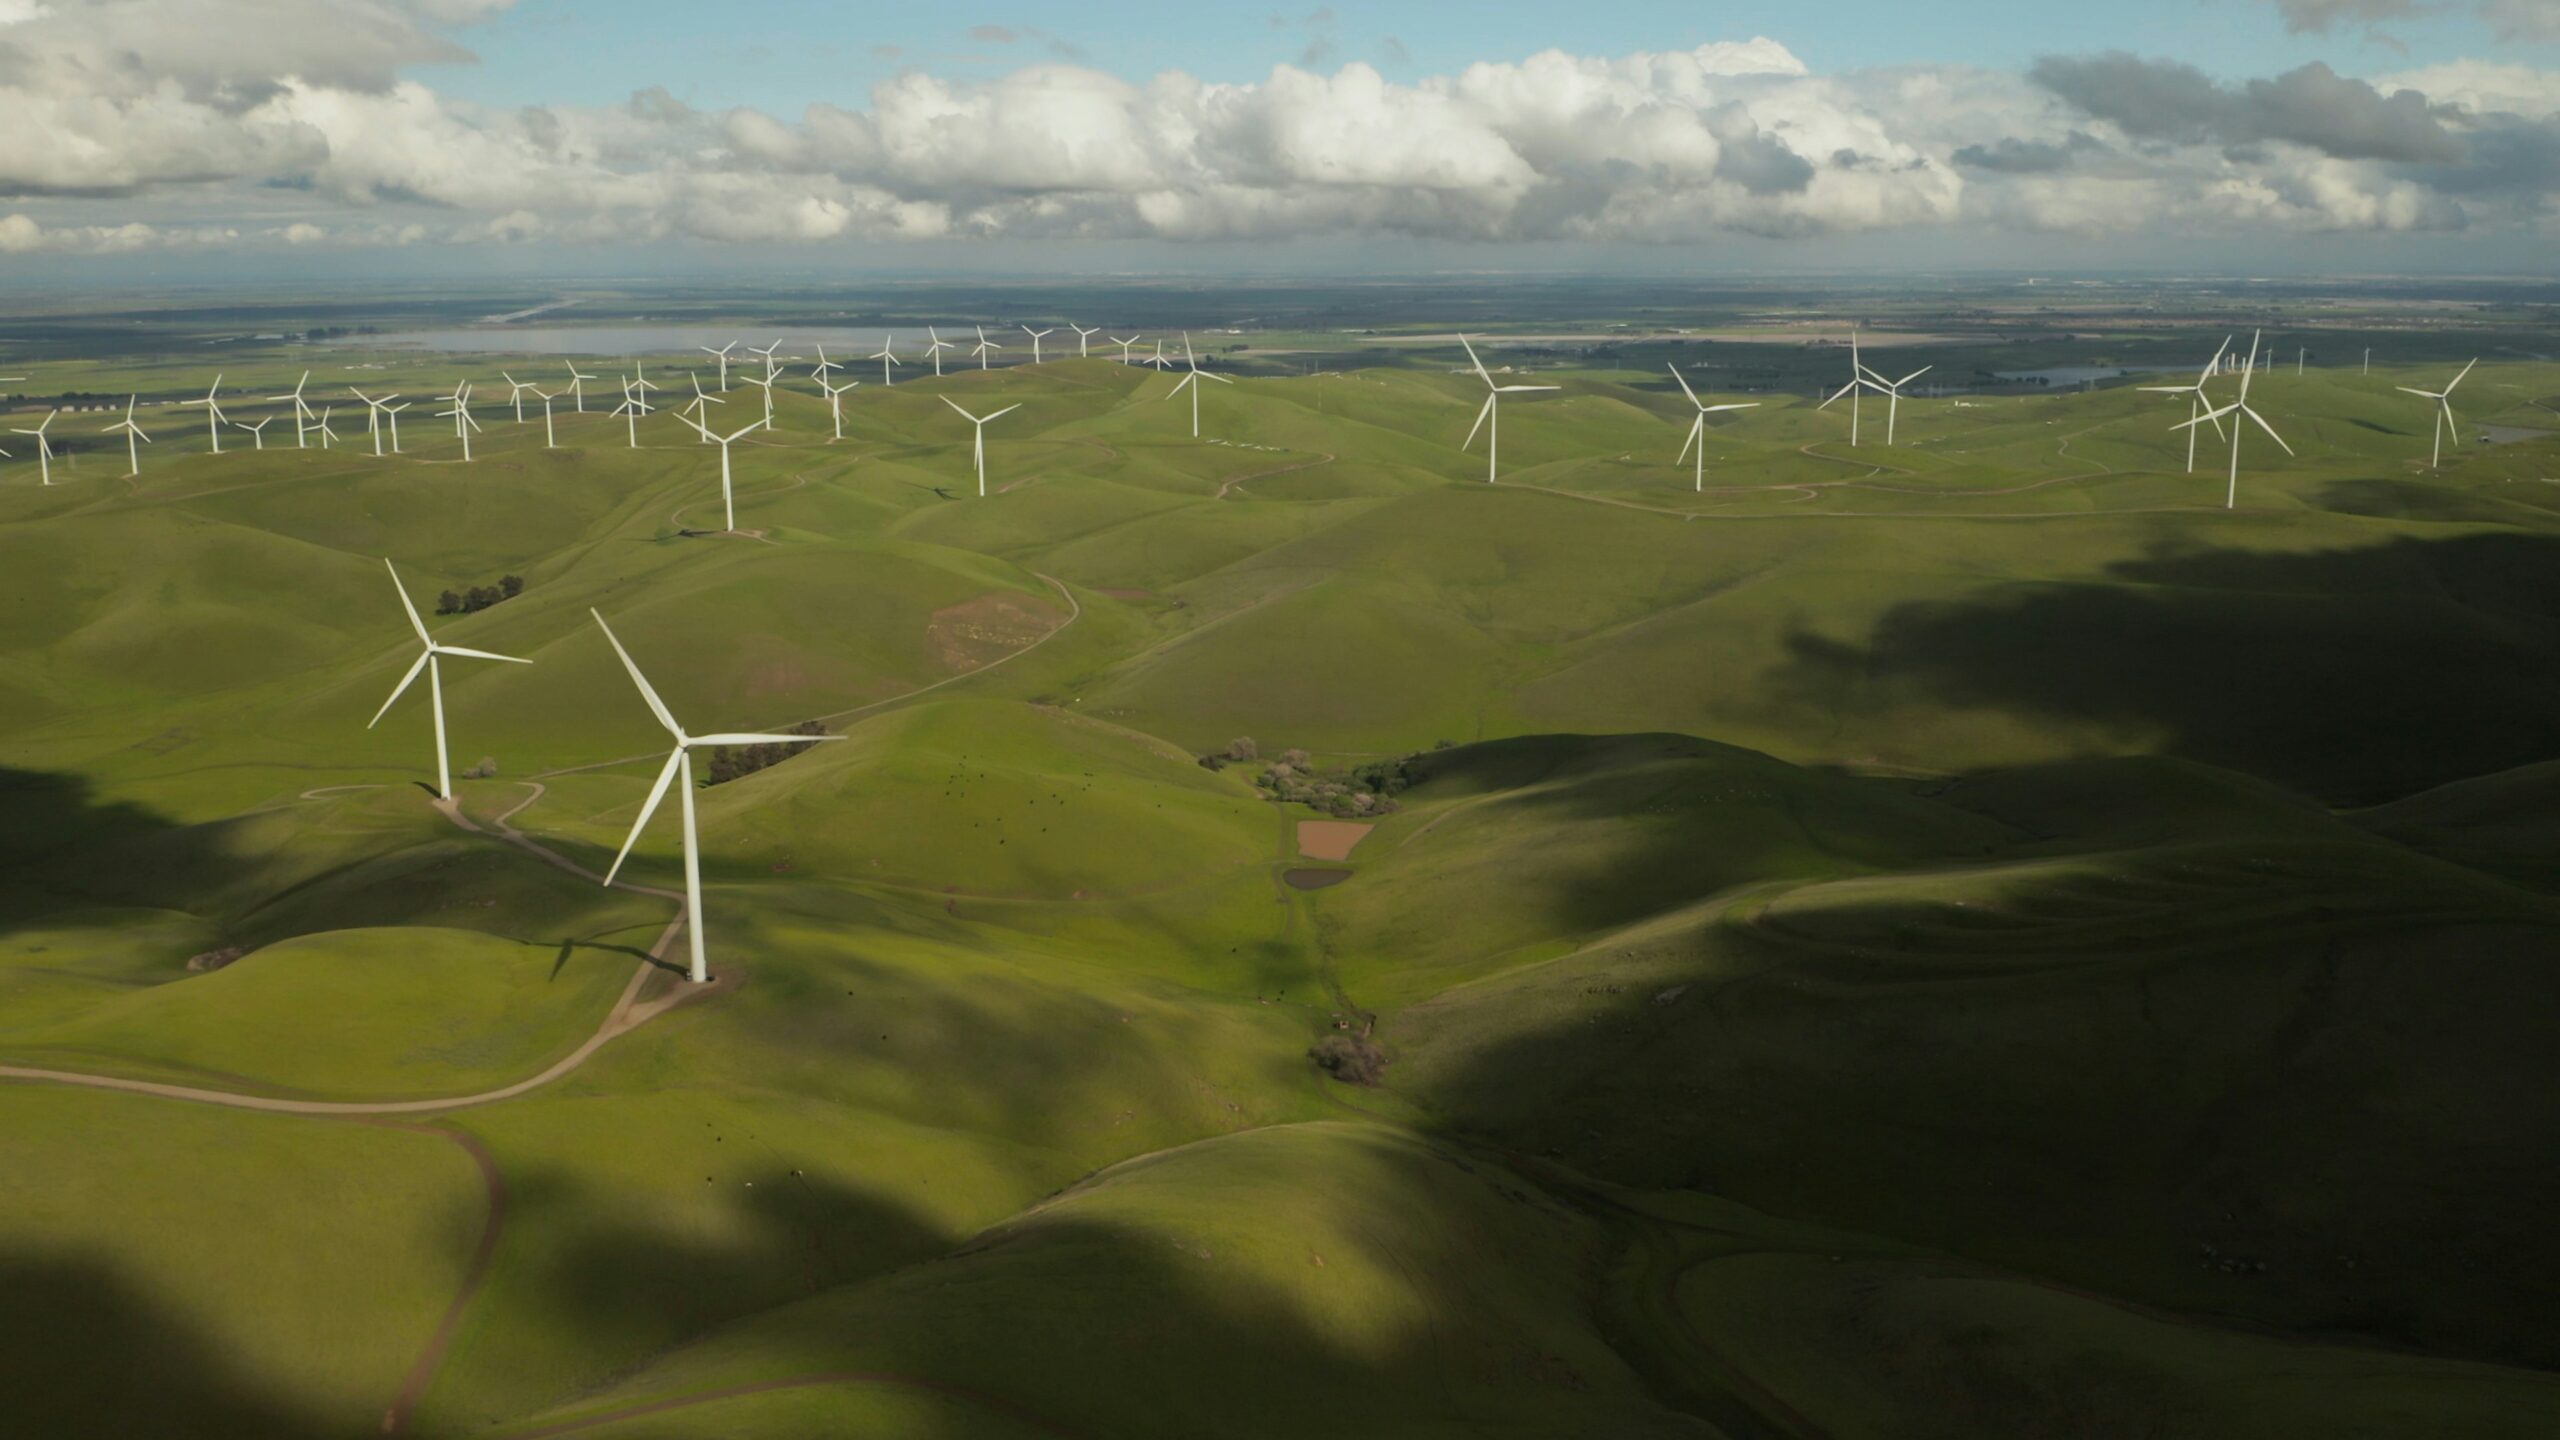 An expansive landscape of rolling green hills dotted with numerous wind turbines under a partly cloudy sky. This image, showcasing renewable energy generation, is credited to Tyler Casey from Unsplash.